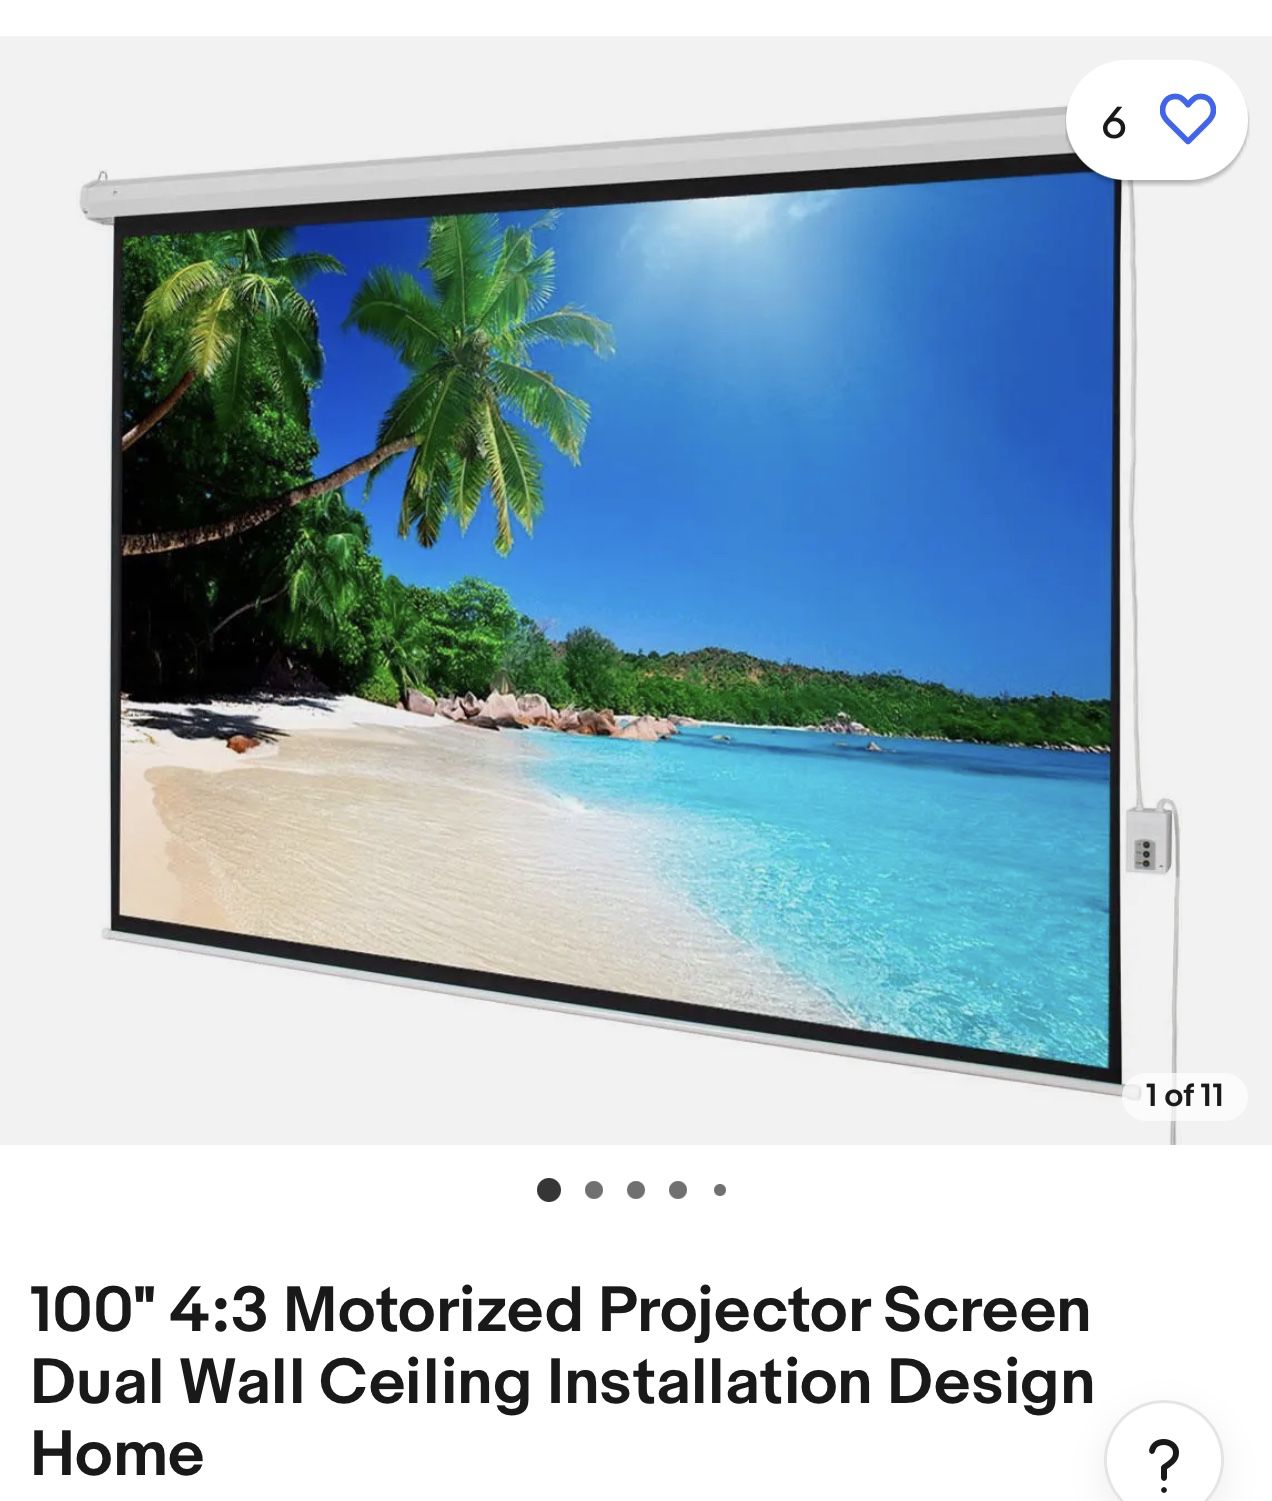 100" 4:3 Motorized Projector Screen Dual Wall Ceiling Installation Design Home